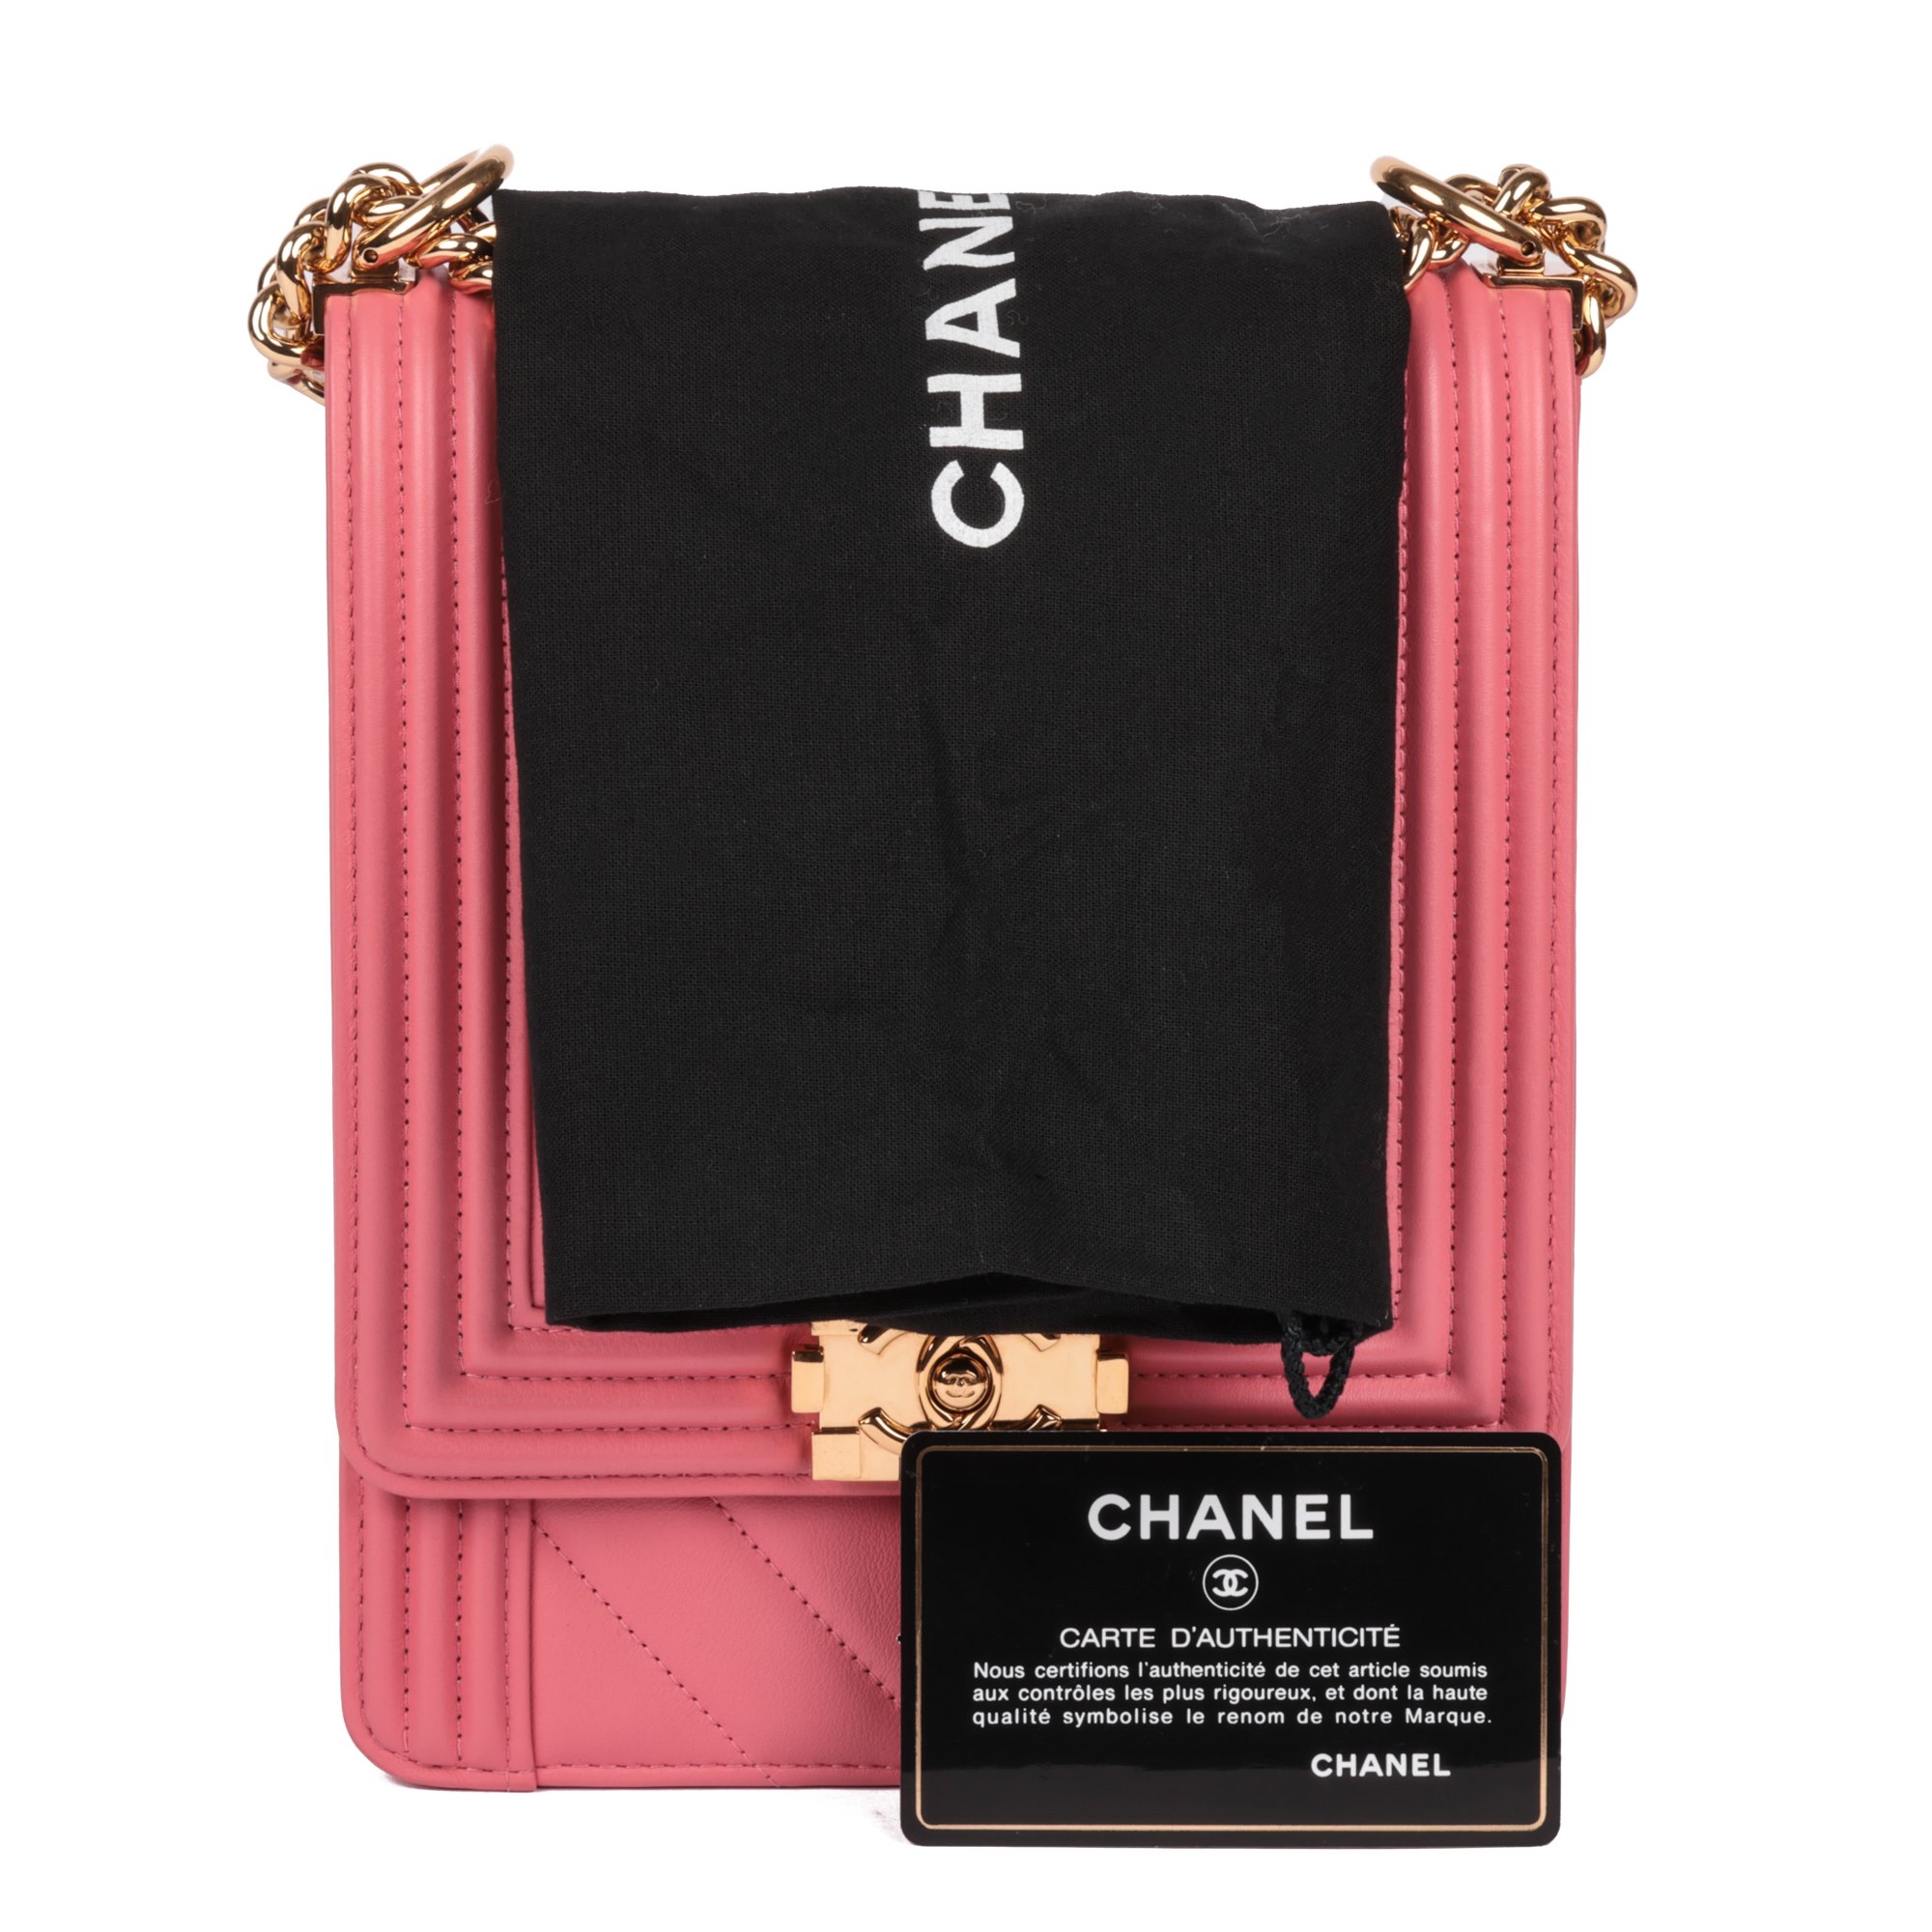 Chanel Pink Chevron Quilted Lambskin North-South Le Boy